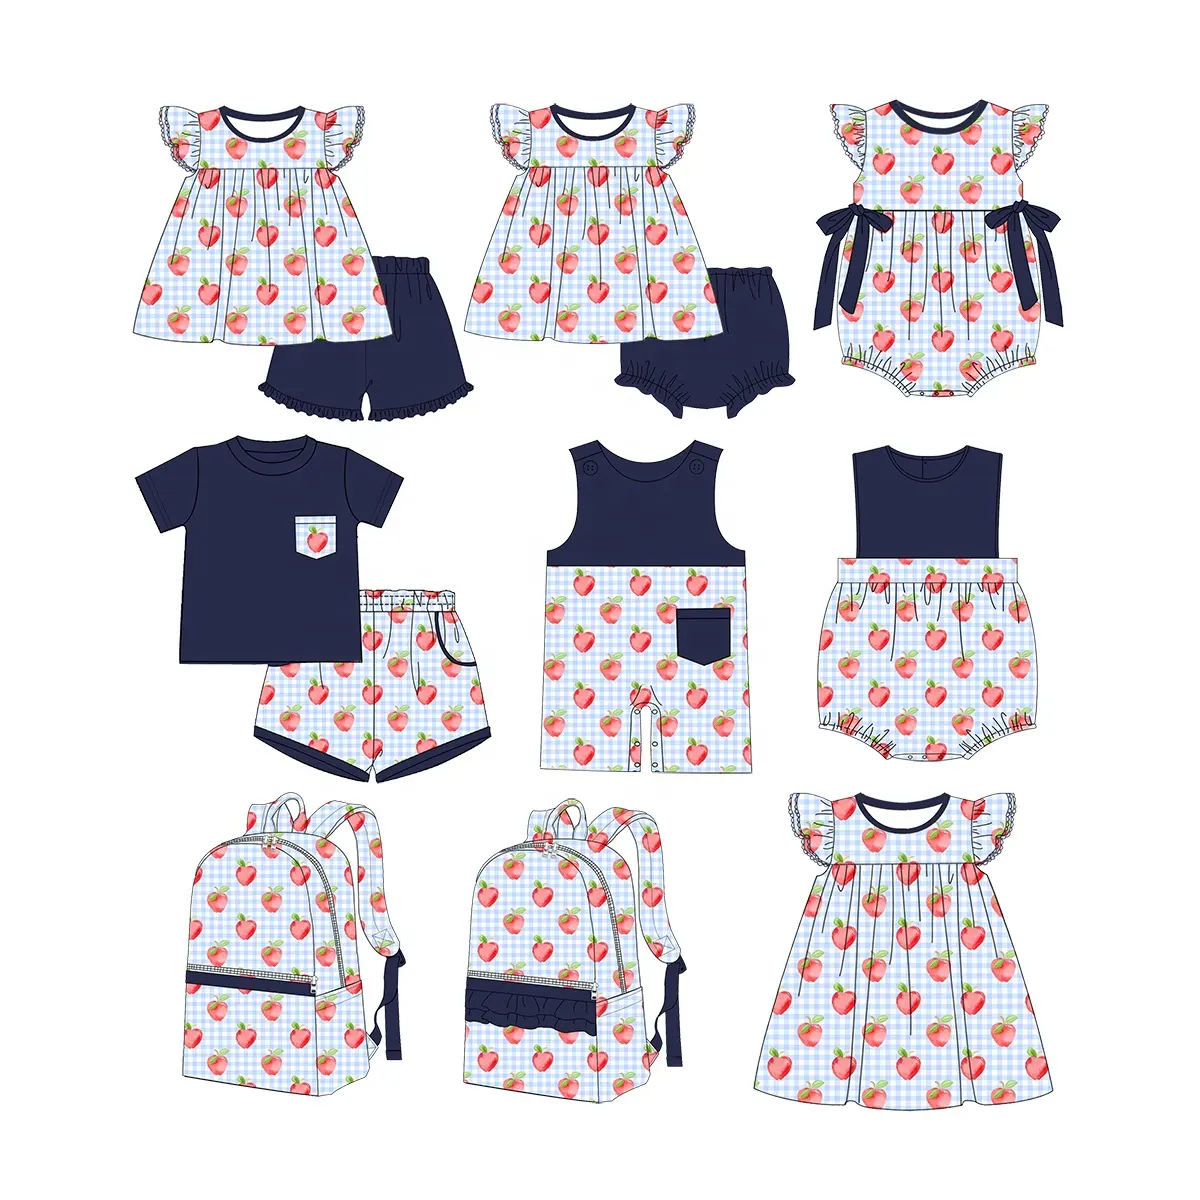 Puresun 100% cotton printing kids clothes school apples baby girl outfit pearl style shirt baby girl clothing